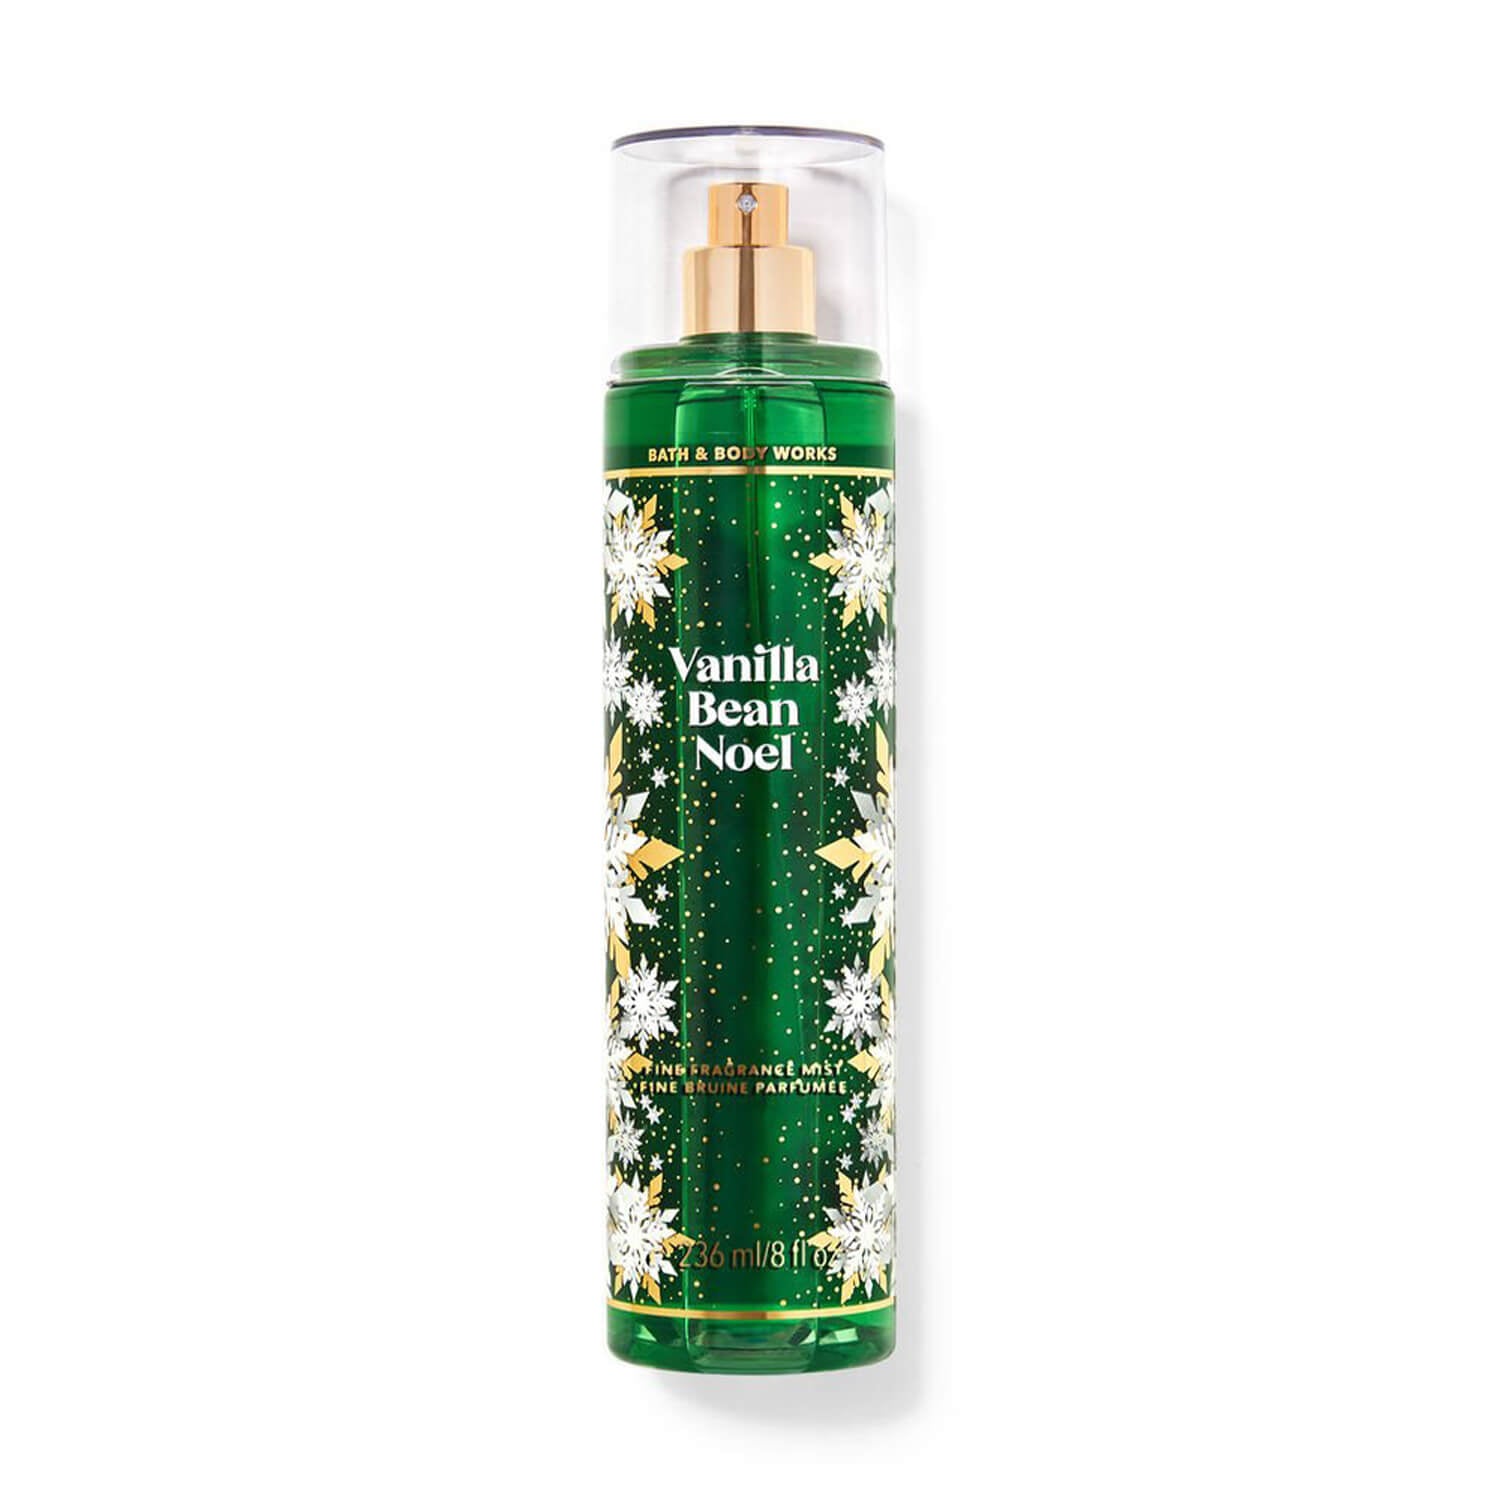 shop bath and body works mist vanilla bean available at heygirl.pk for delivery in Pakistan